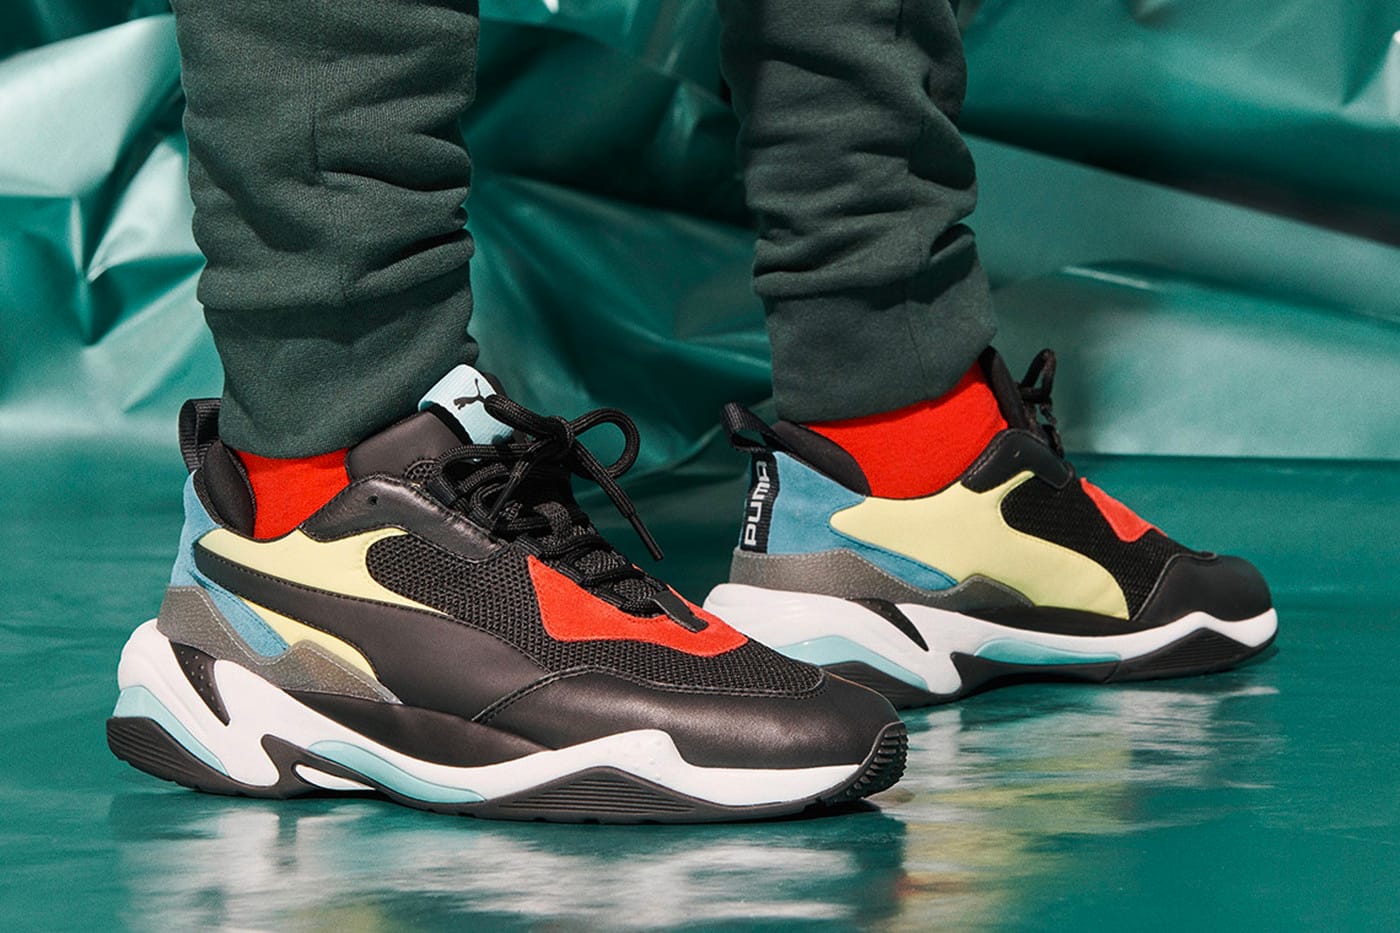 PUMA to Restock Thunder Spectra for 